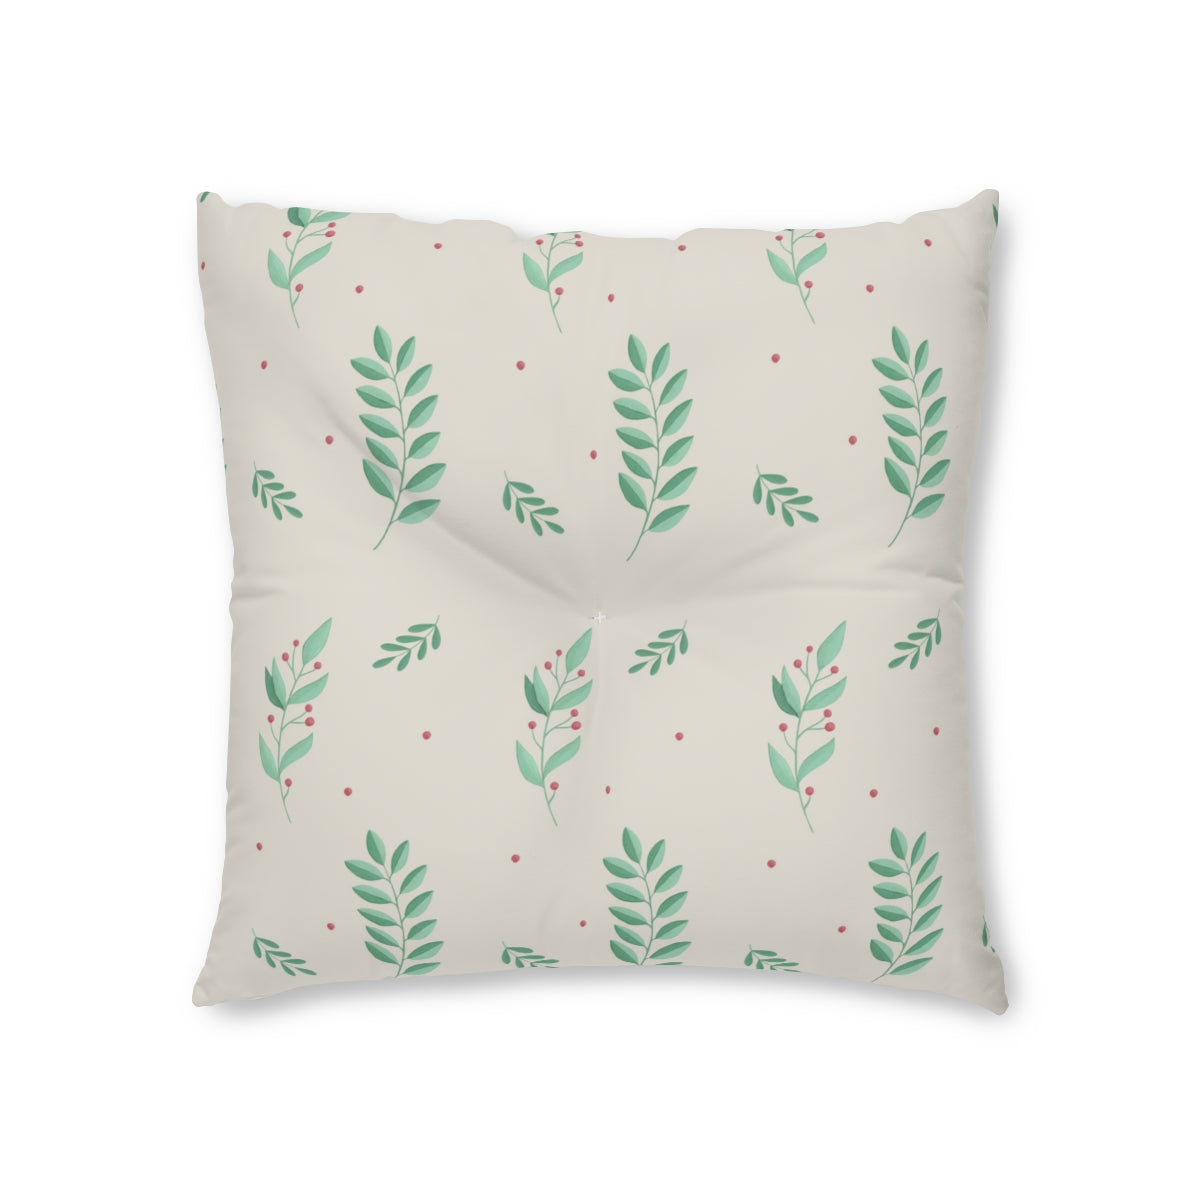 Lifestyle Details - Square Tufted Holiday Floor Pillow - Large Holly - 26x26 - Front View